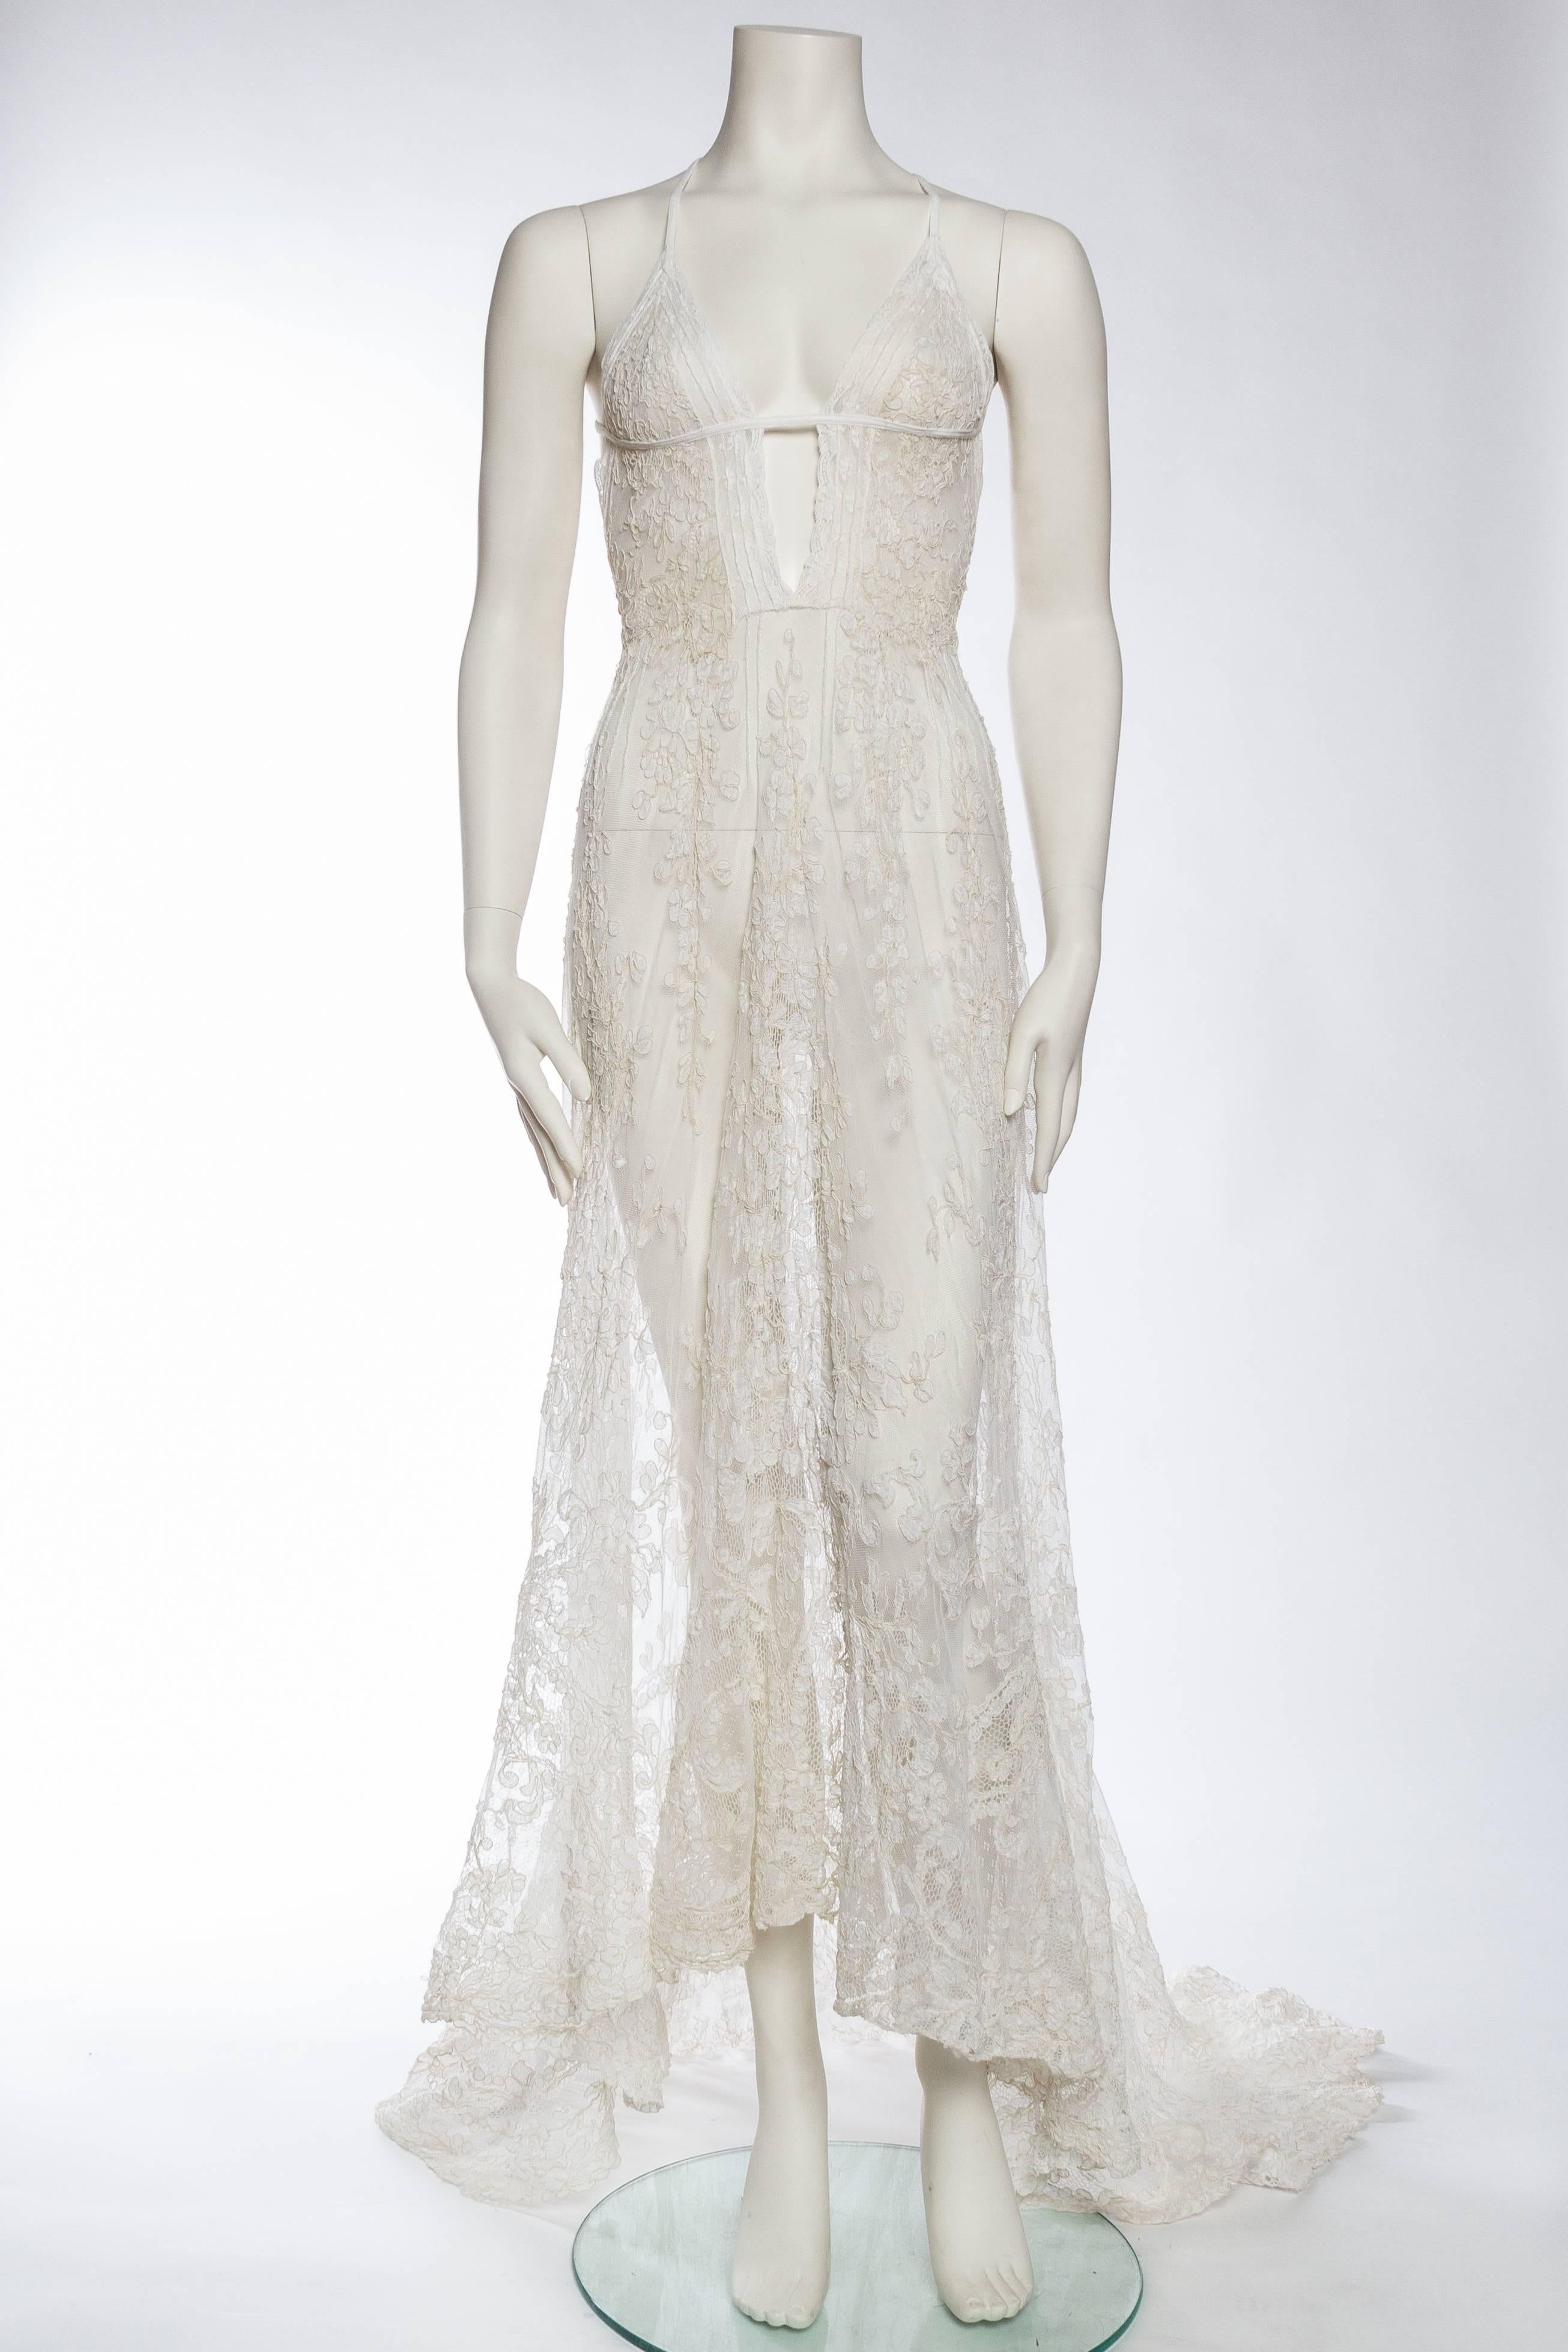 Exquisite Belle Epoch Victorian Lace Backless Trained Gown at 1stDibs ...